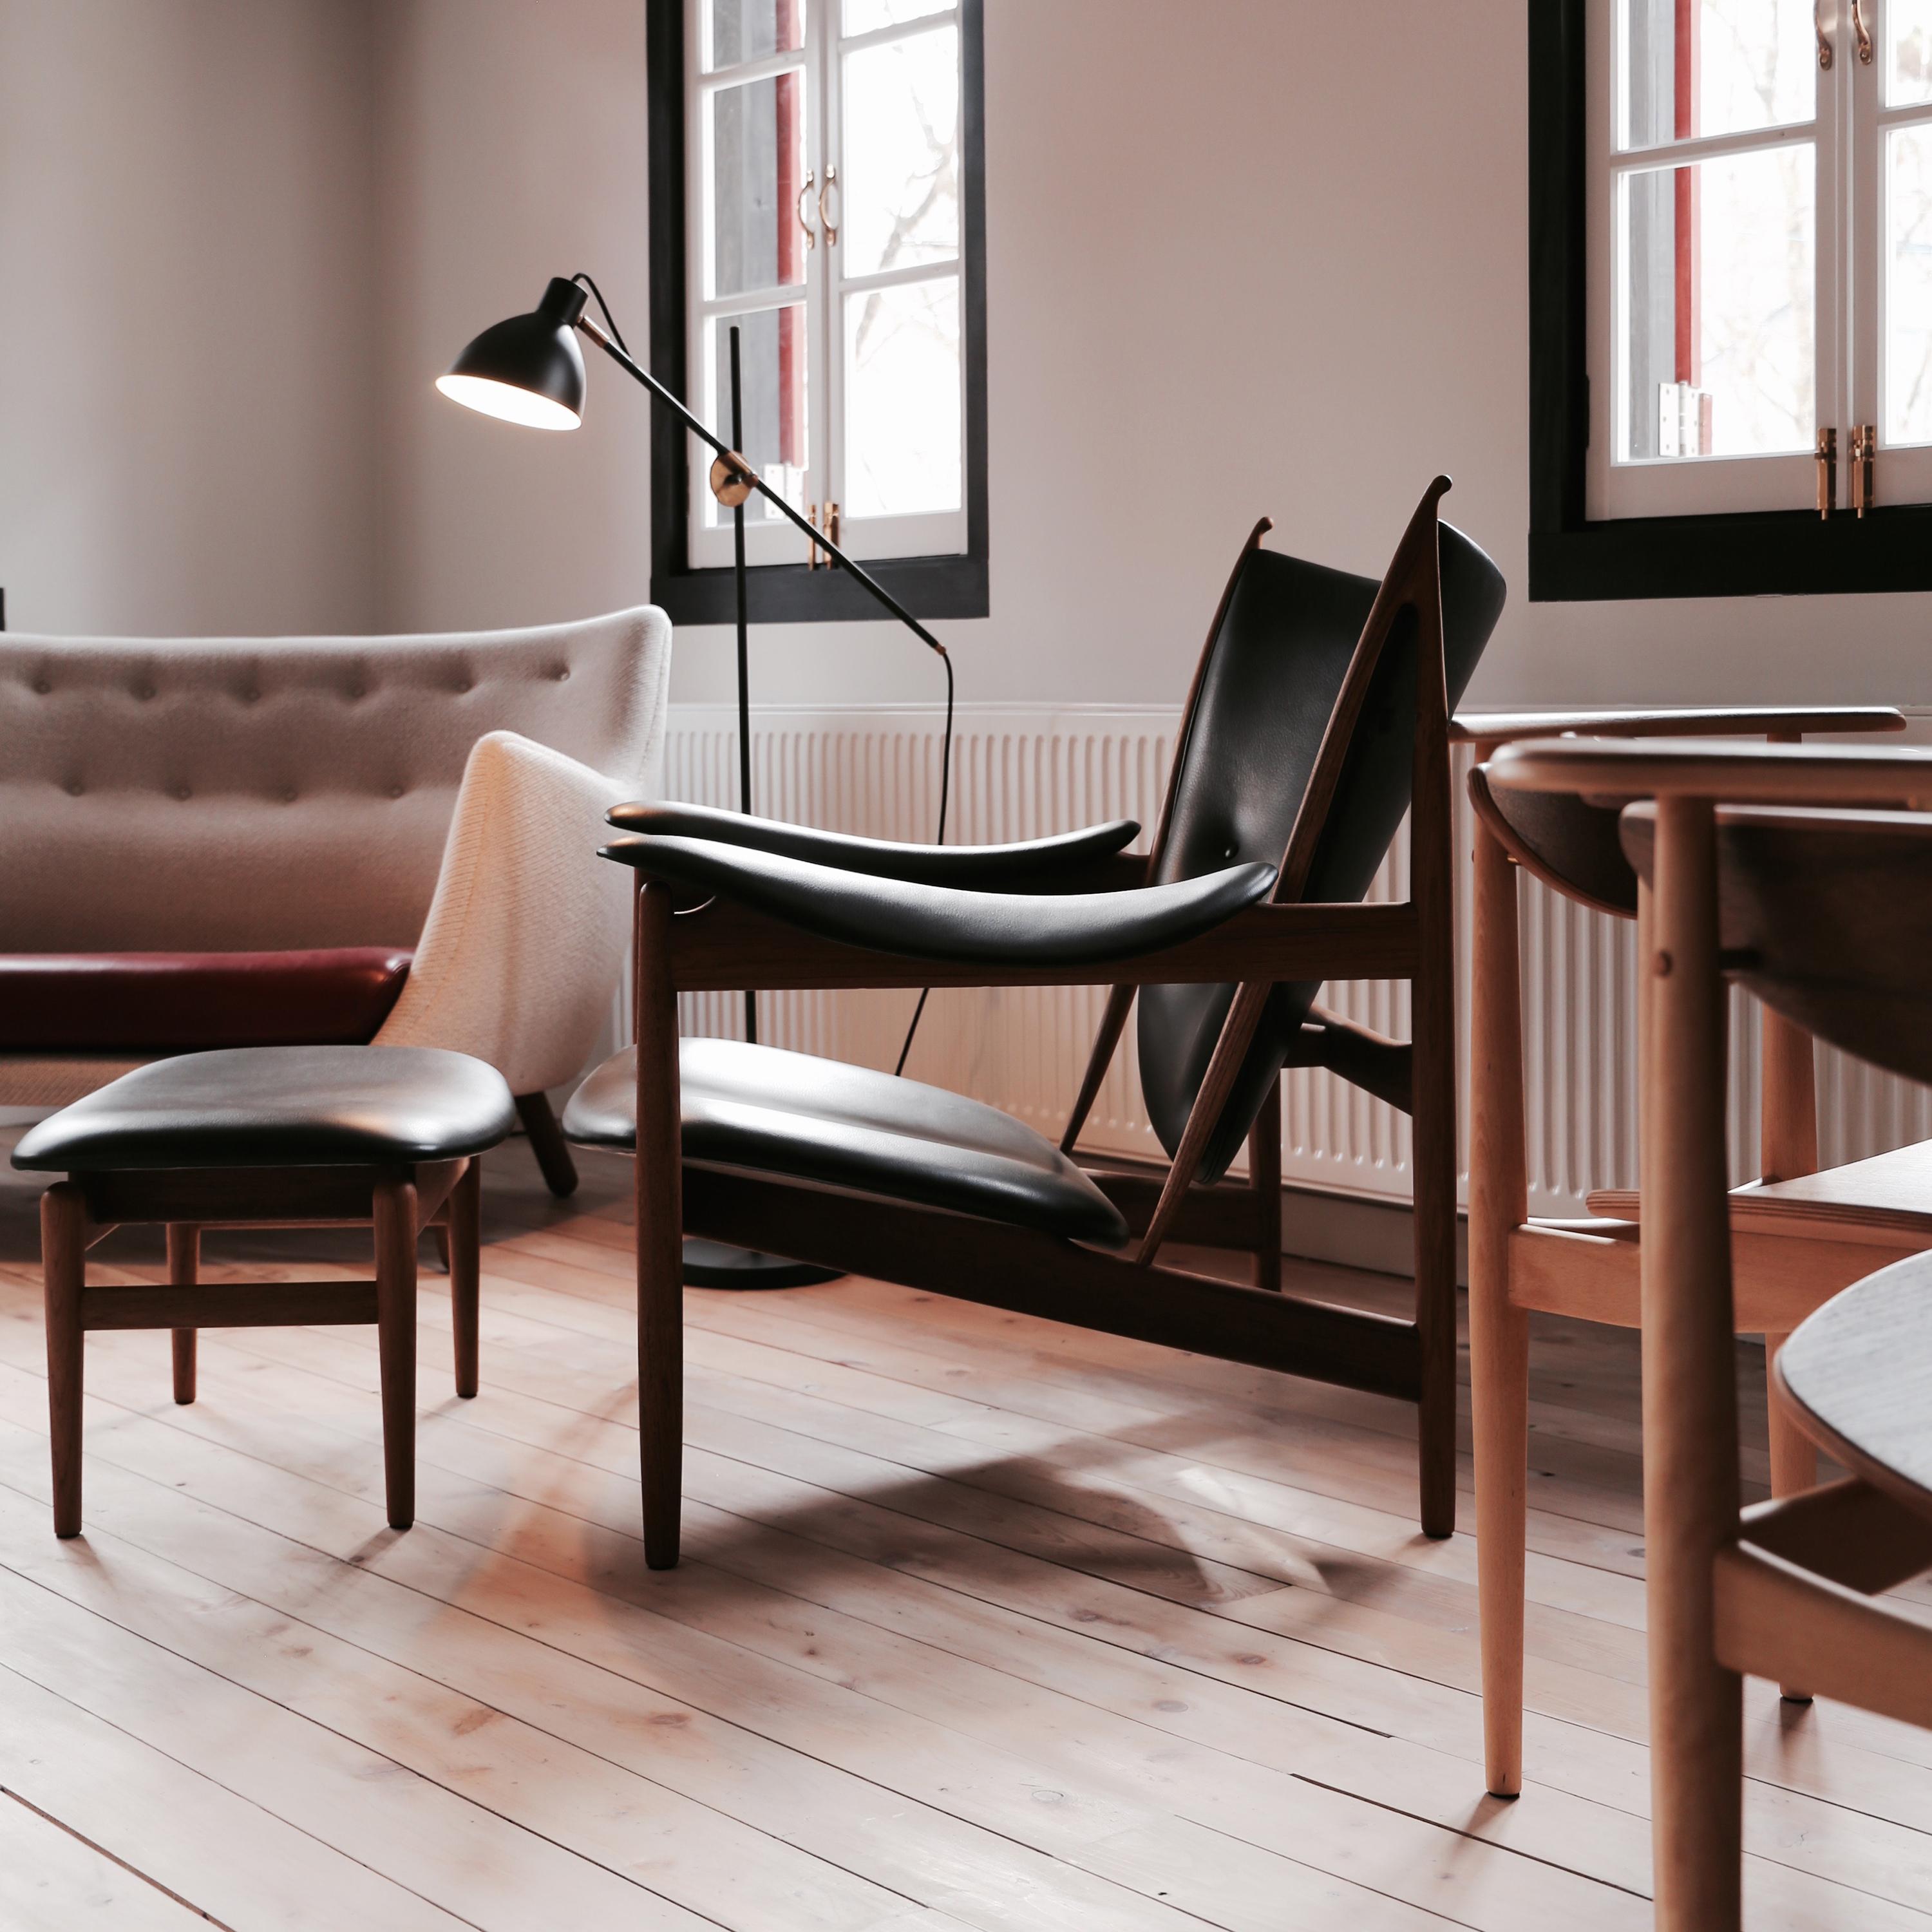 Set of Chieftain Armchair and Chieftain Stool in Wood and Leather by Finn Juhl 5